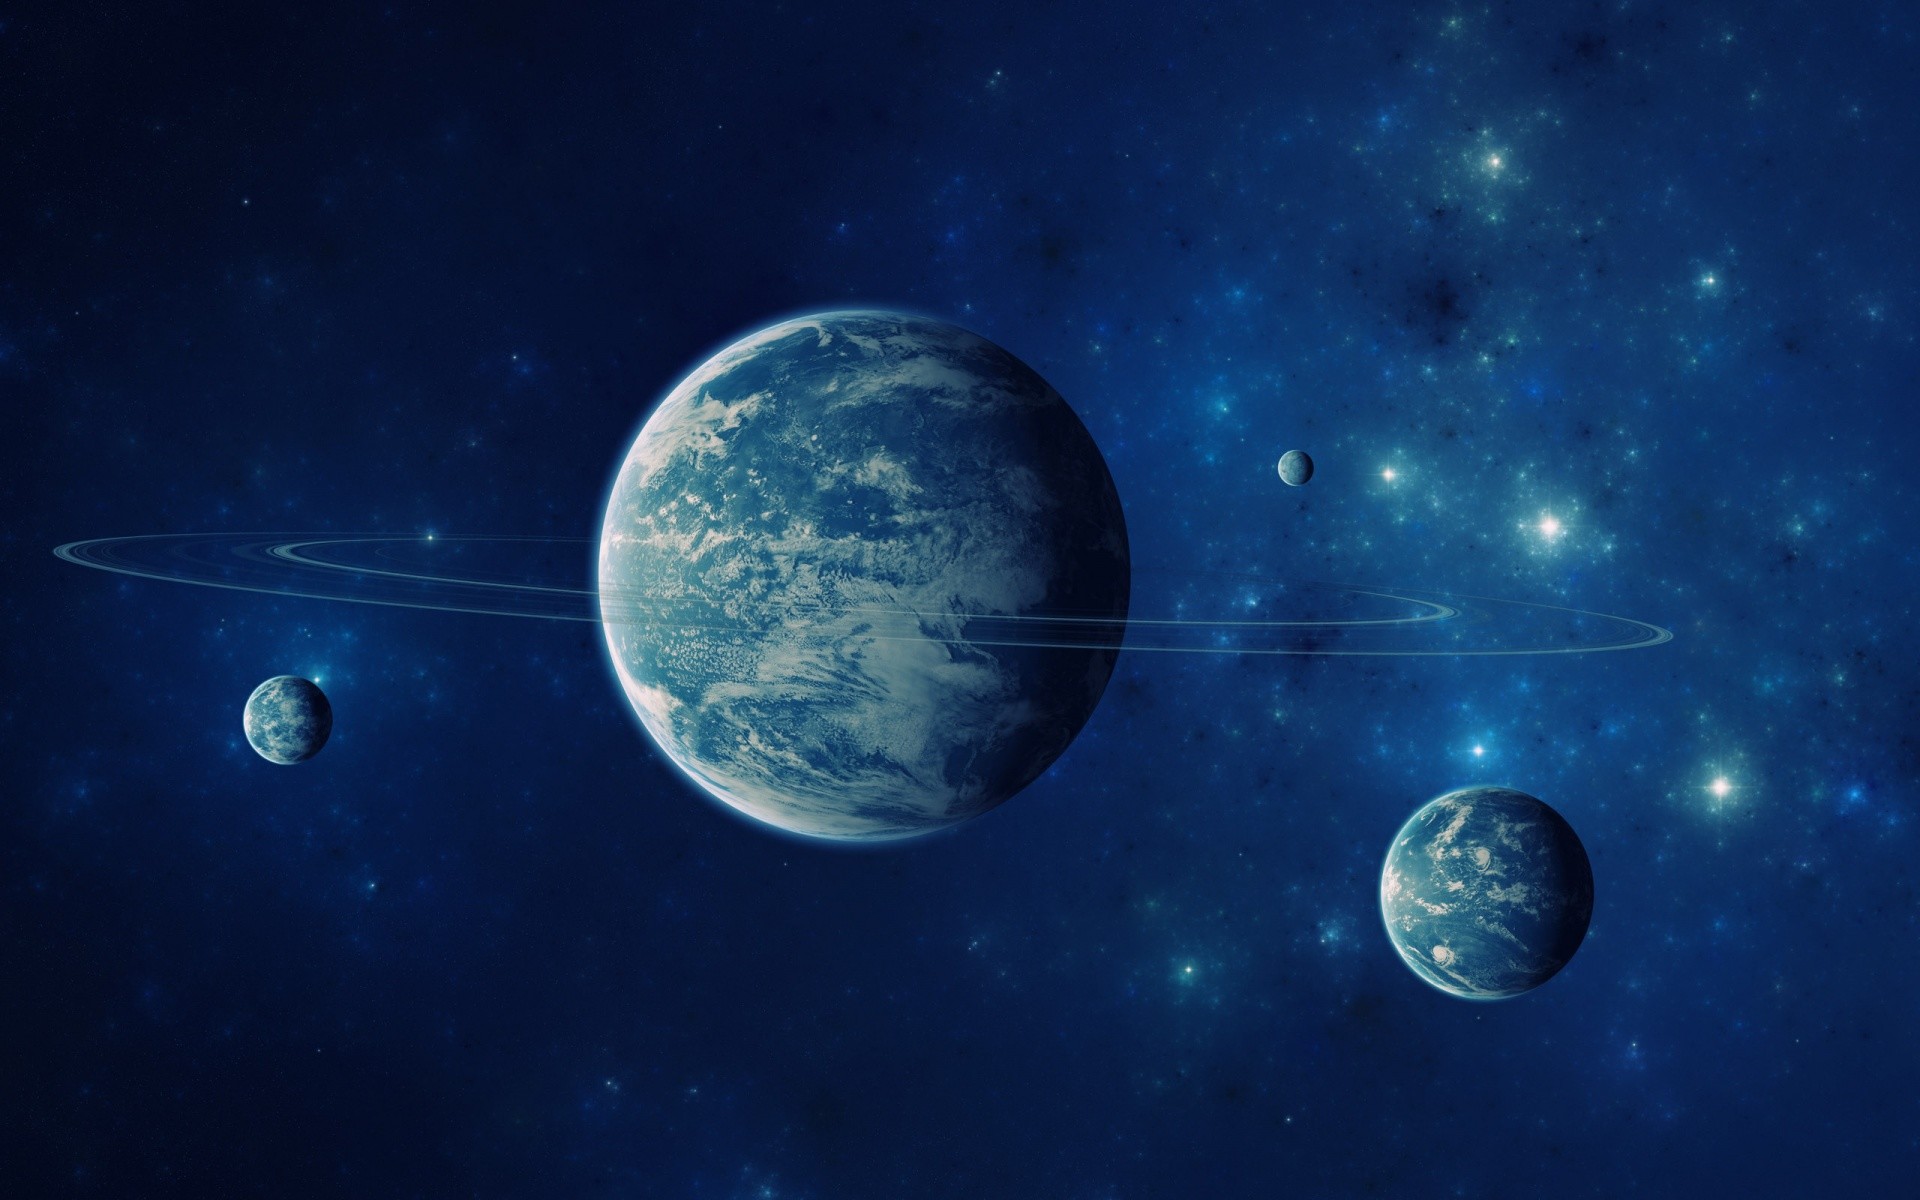 scientific wallpaper,outer space,planet,astronomical object,atmosphere,sky